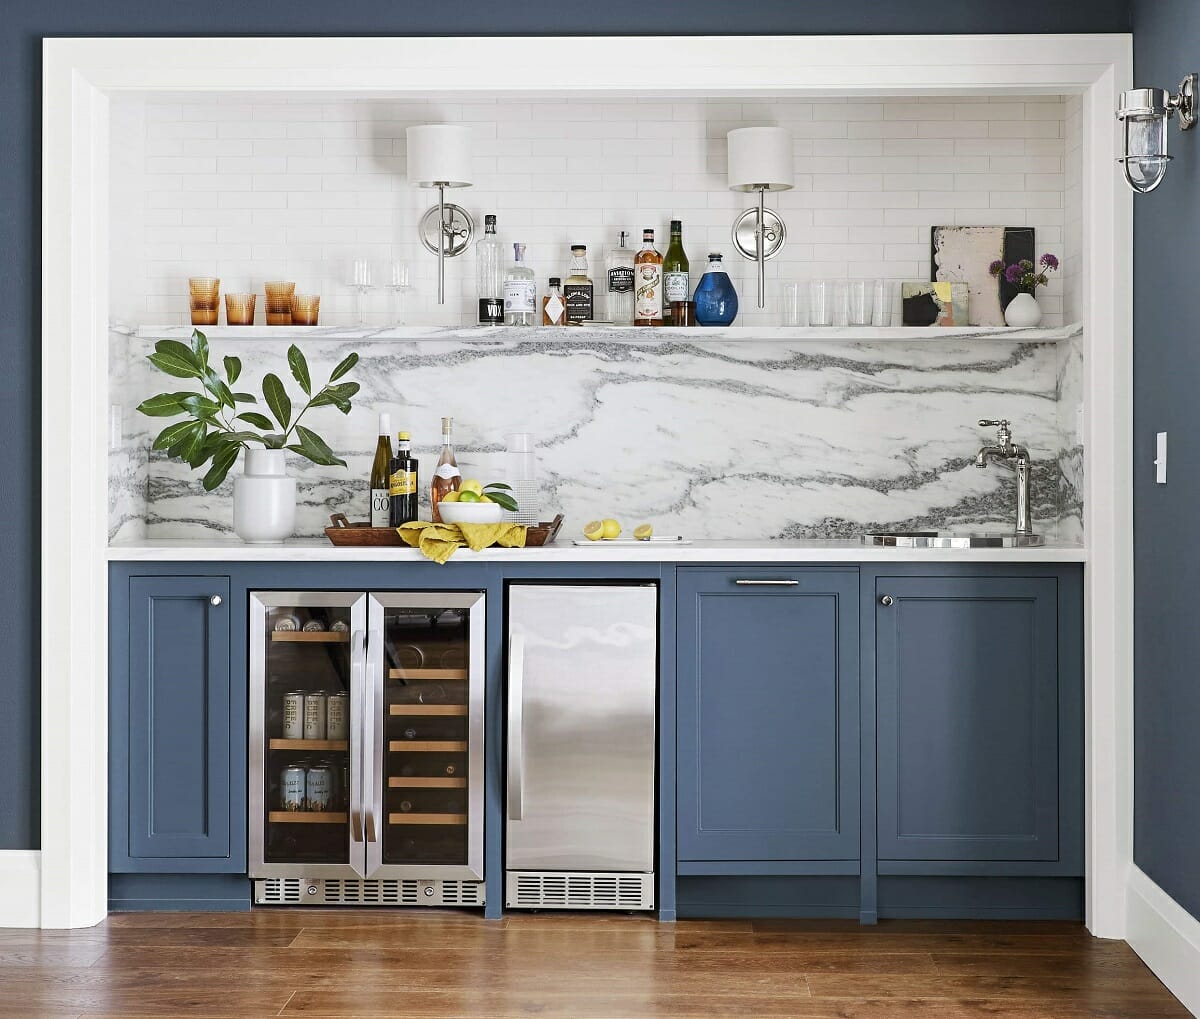 Wet bar ideas - Style by Emily